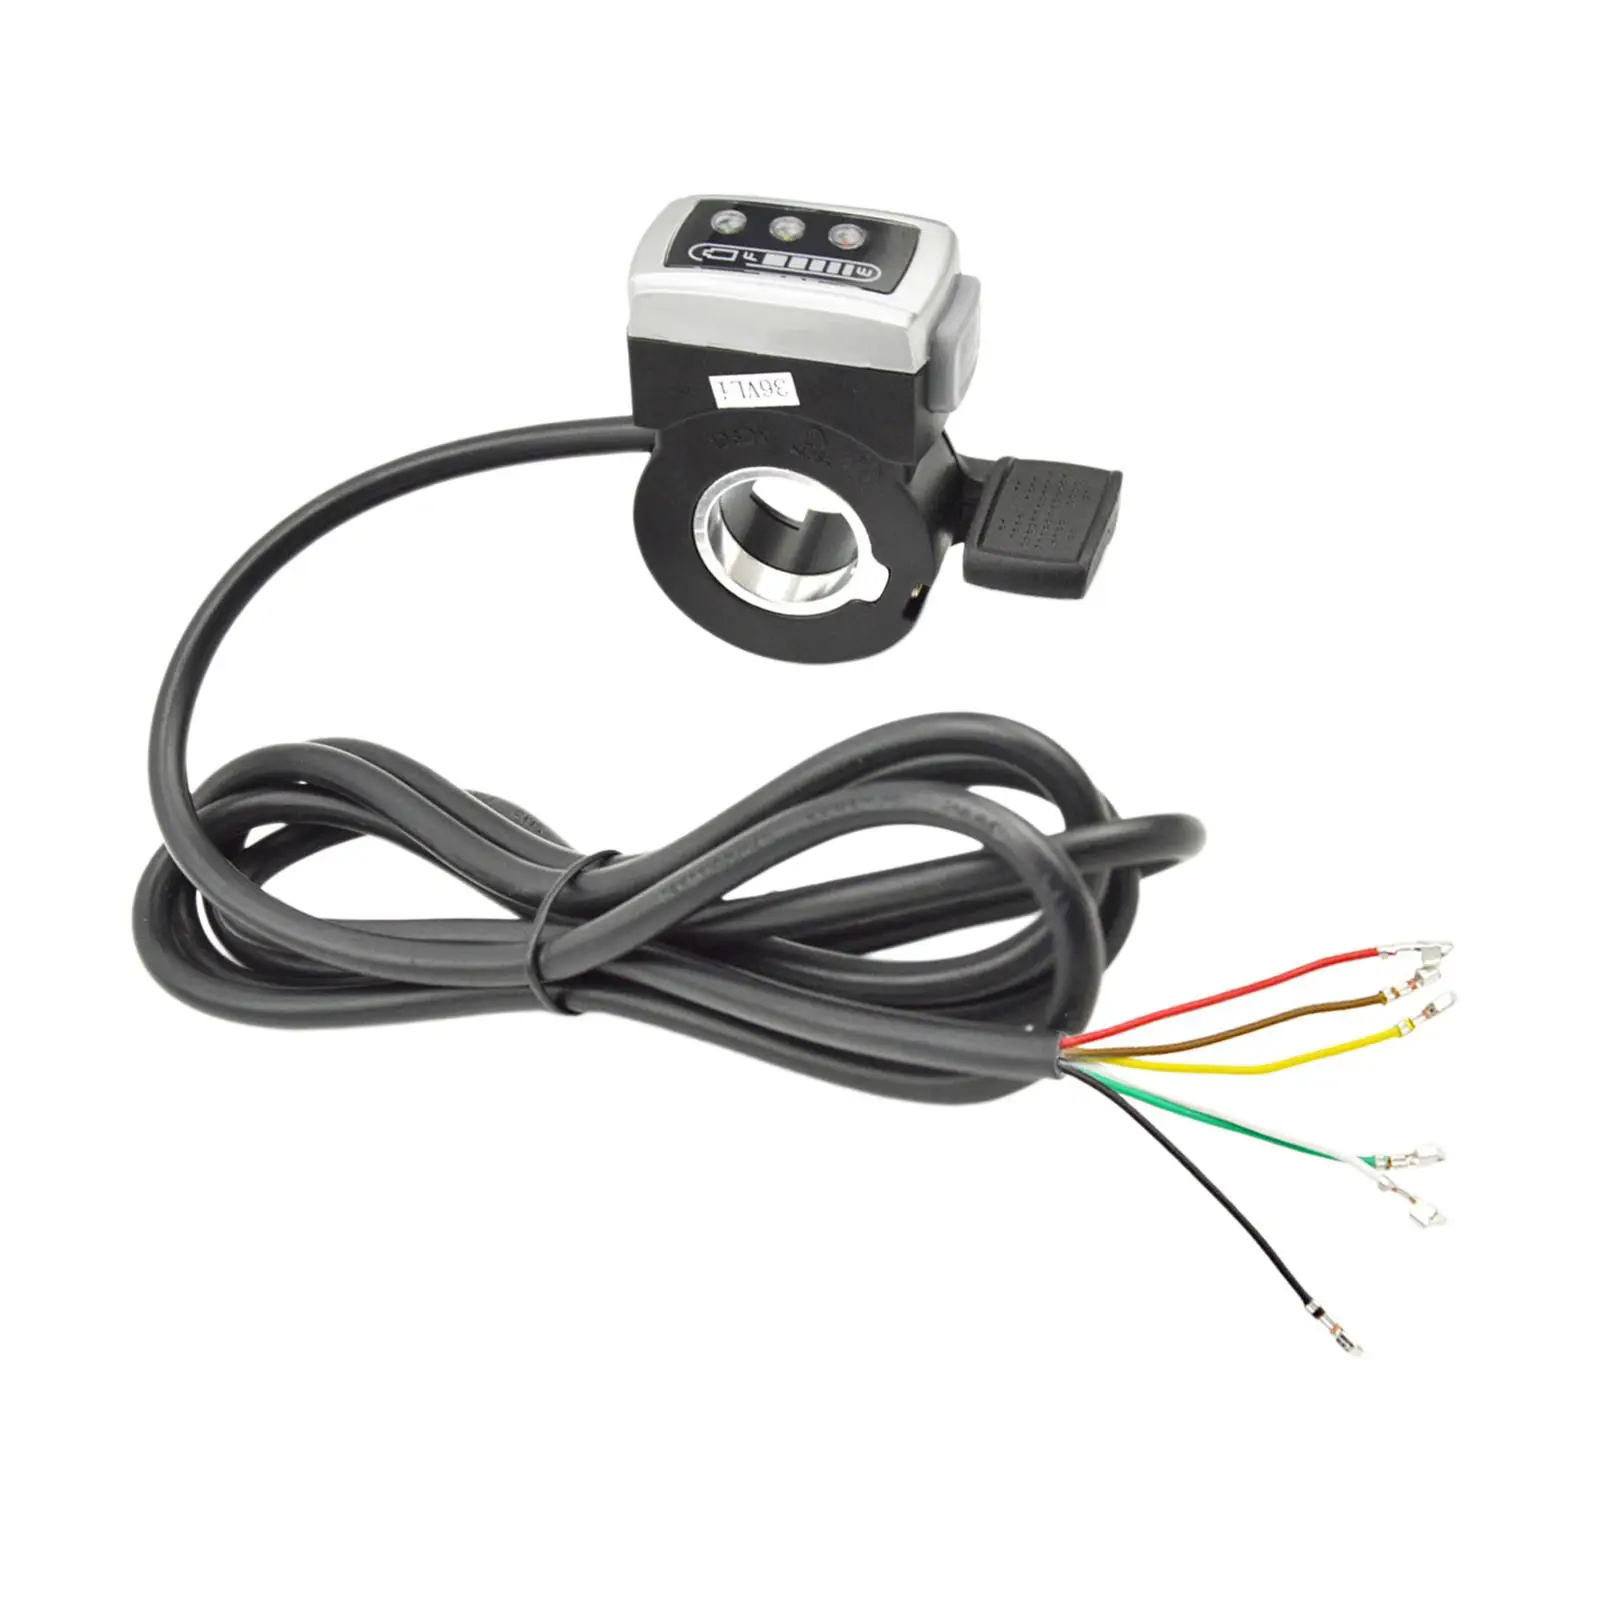 48V Thumb Throttle Speed Control with Power Indicator Part Cycling Kit Accessories with Cable for 22mm Handle Electric Scooters